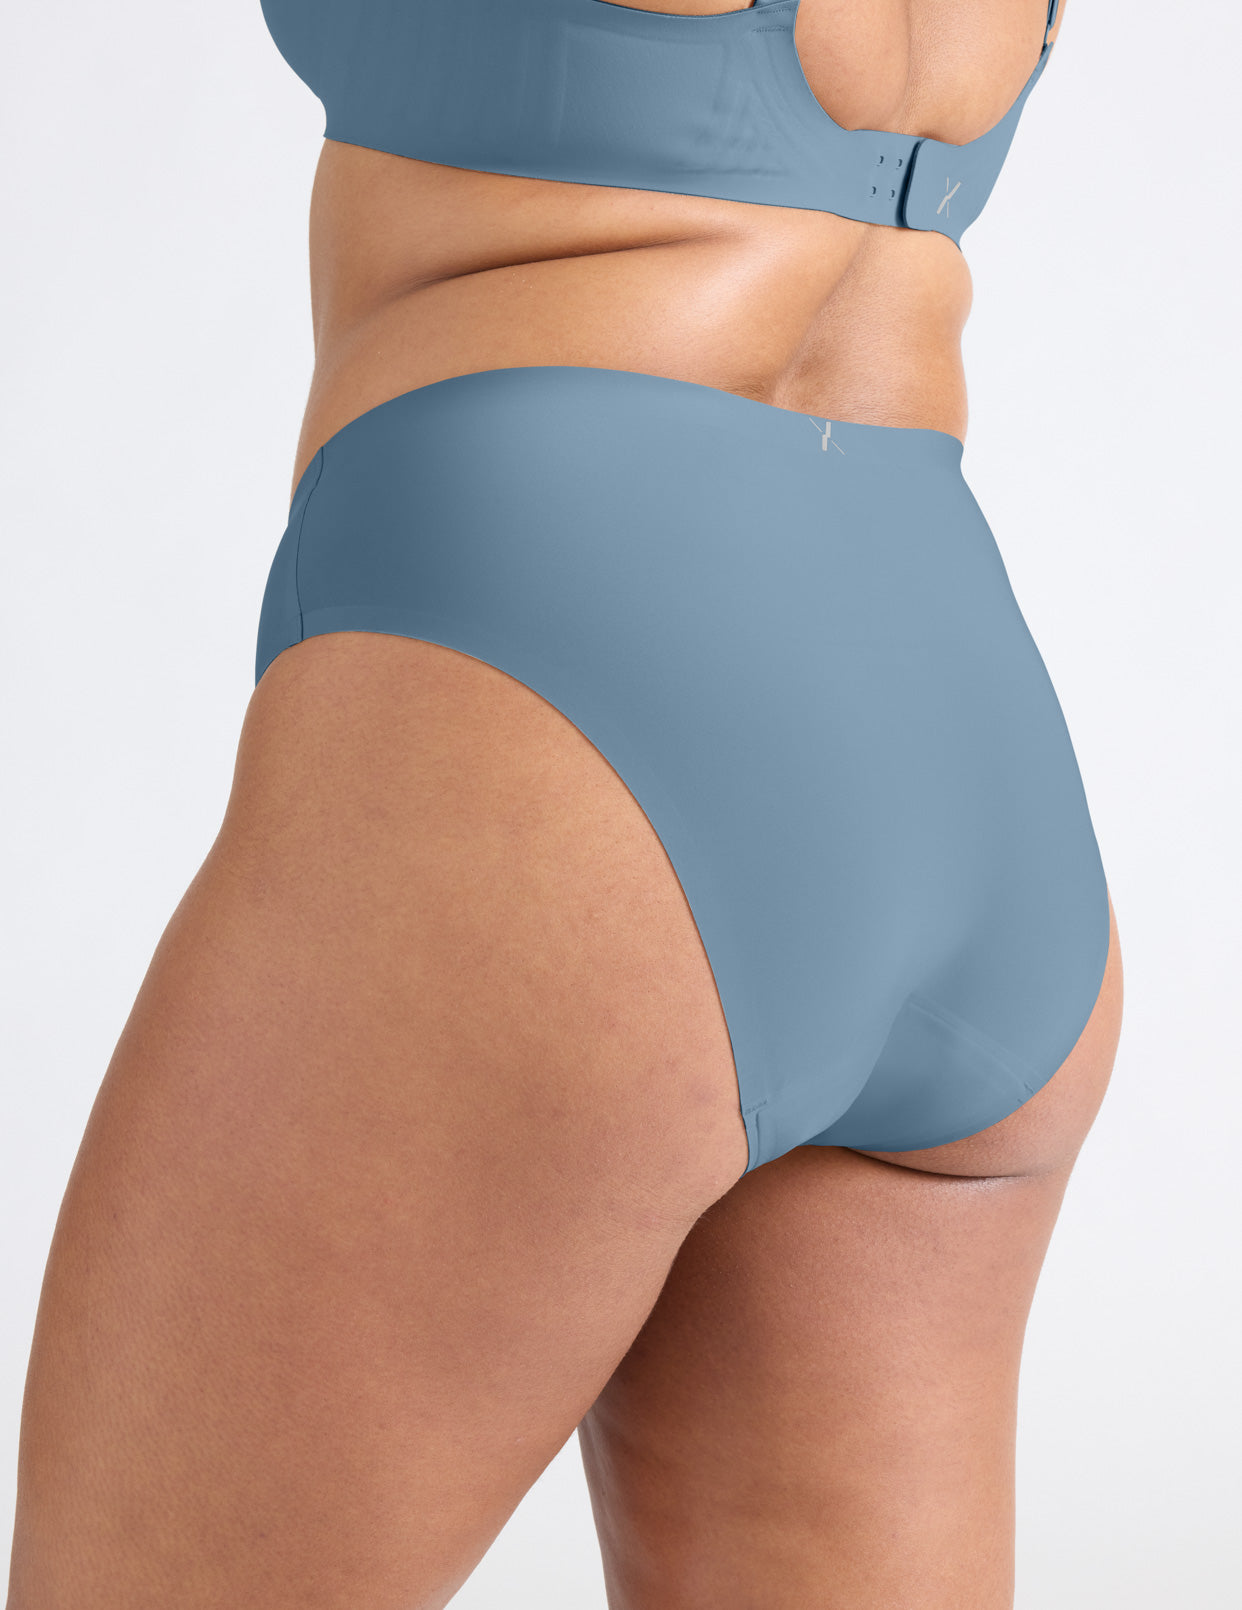 My thoughts on the newest launch from @KNIX - French Cut Leakproof Und